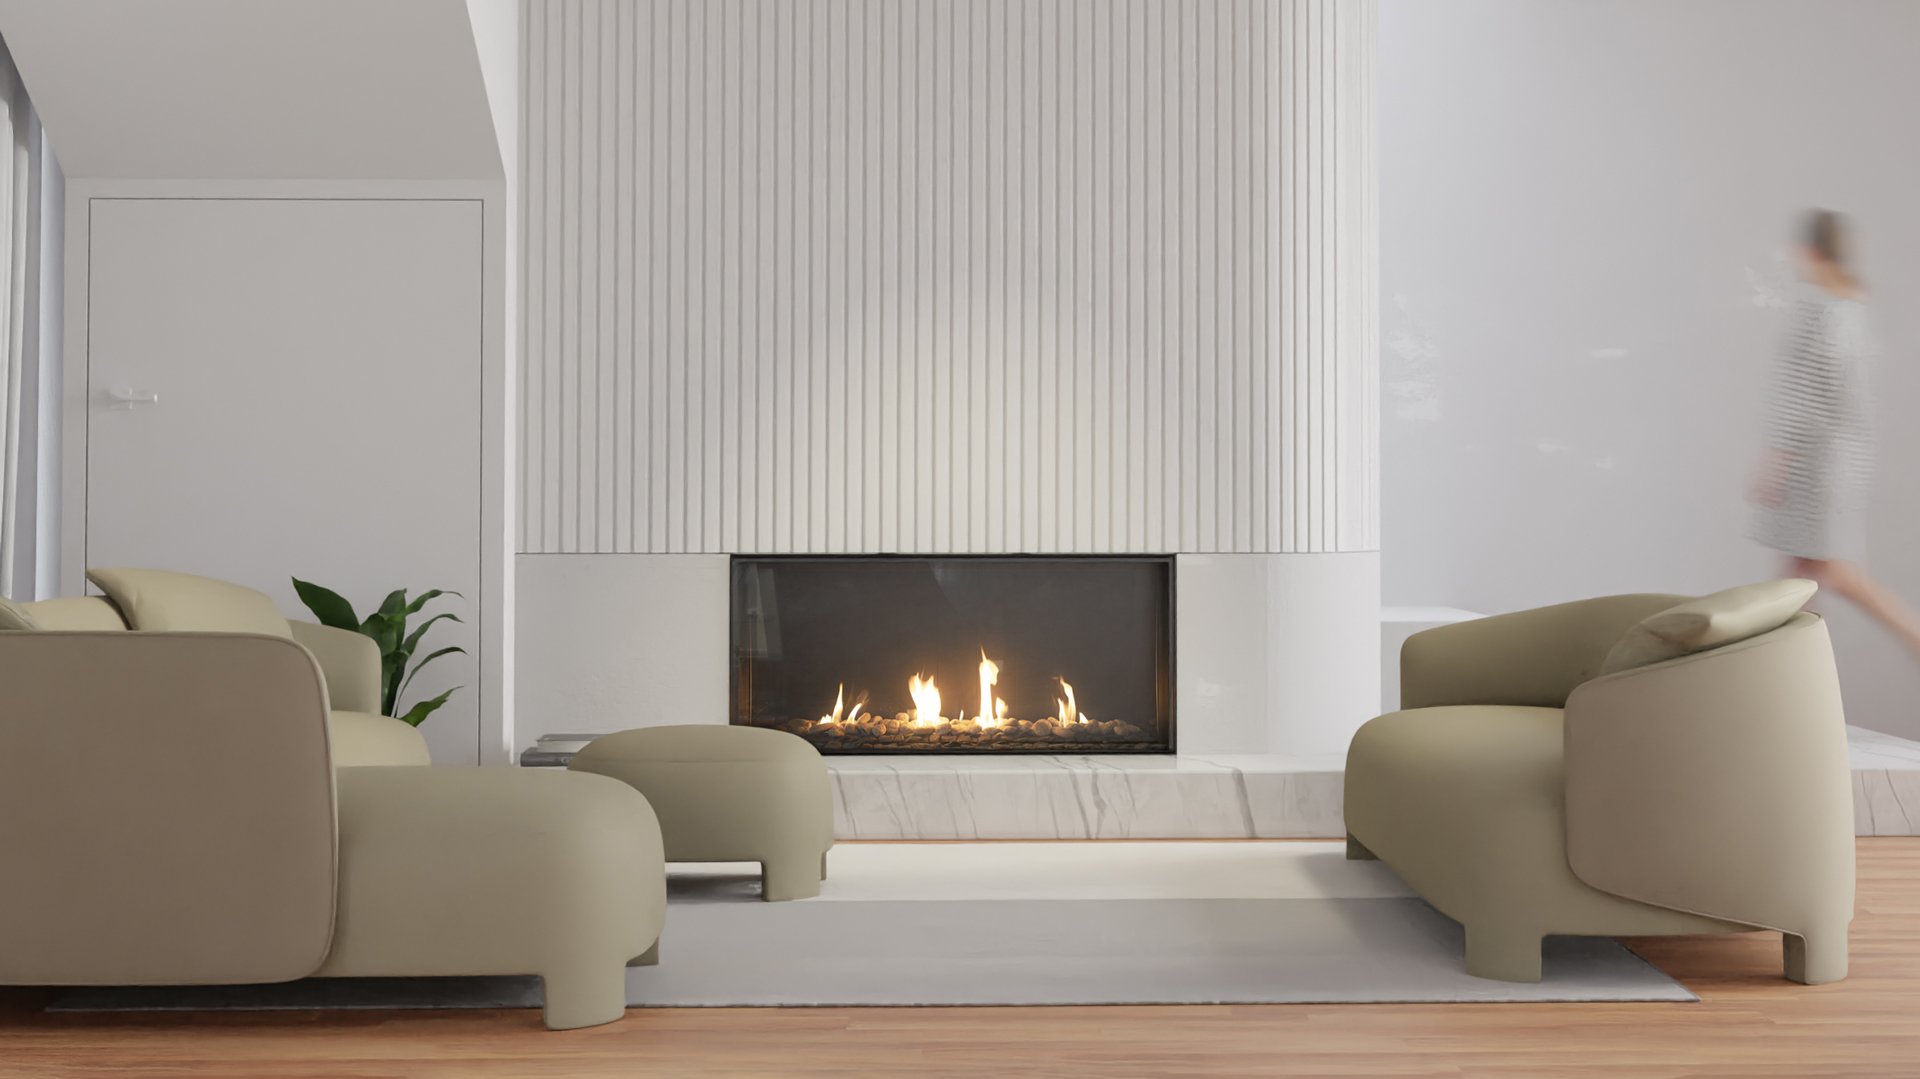 Introducing the Escea KS55 Gas Fireplace Range to North America